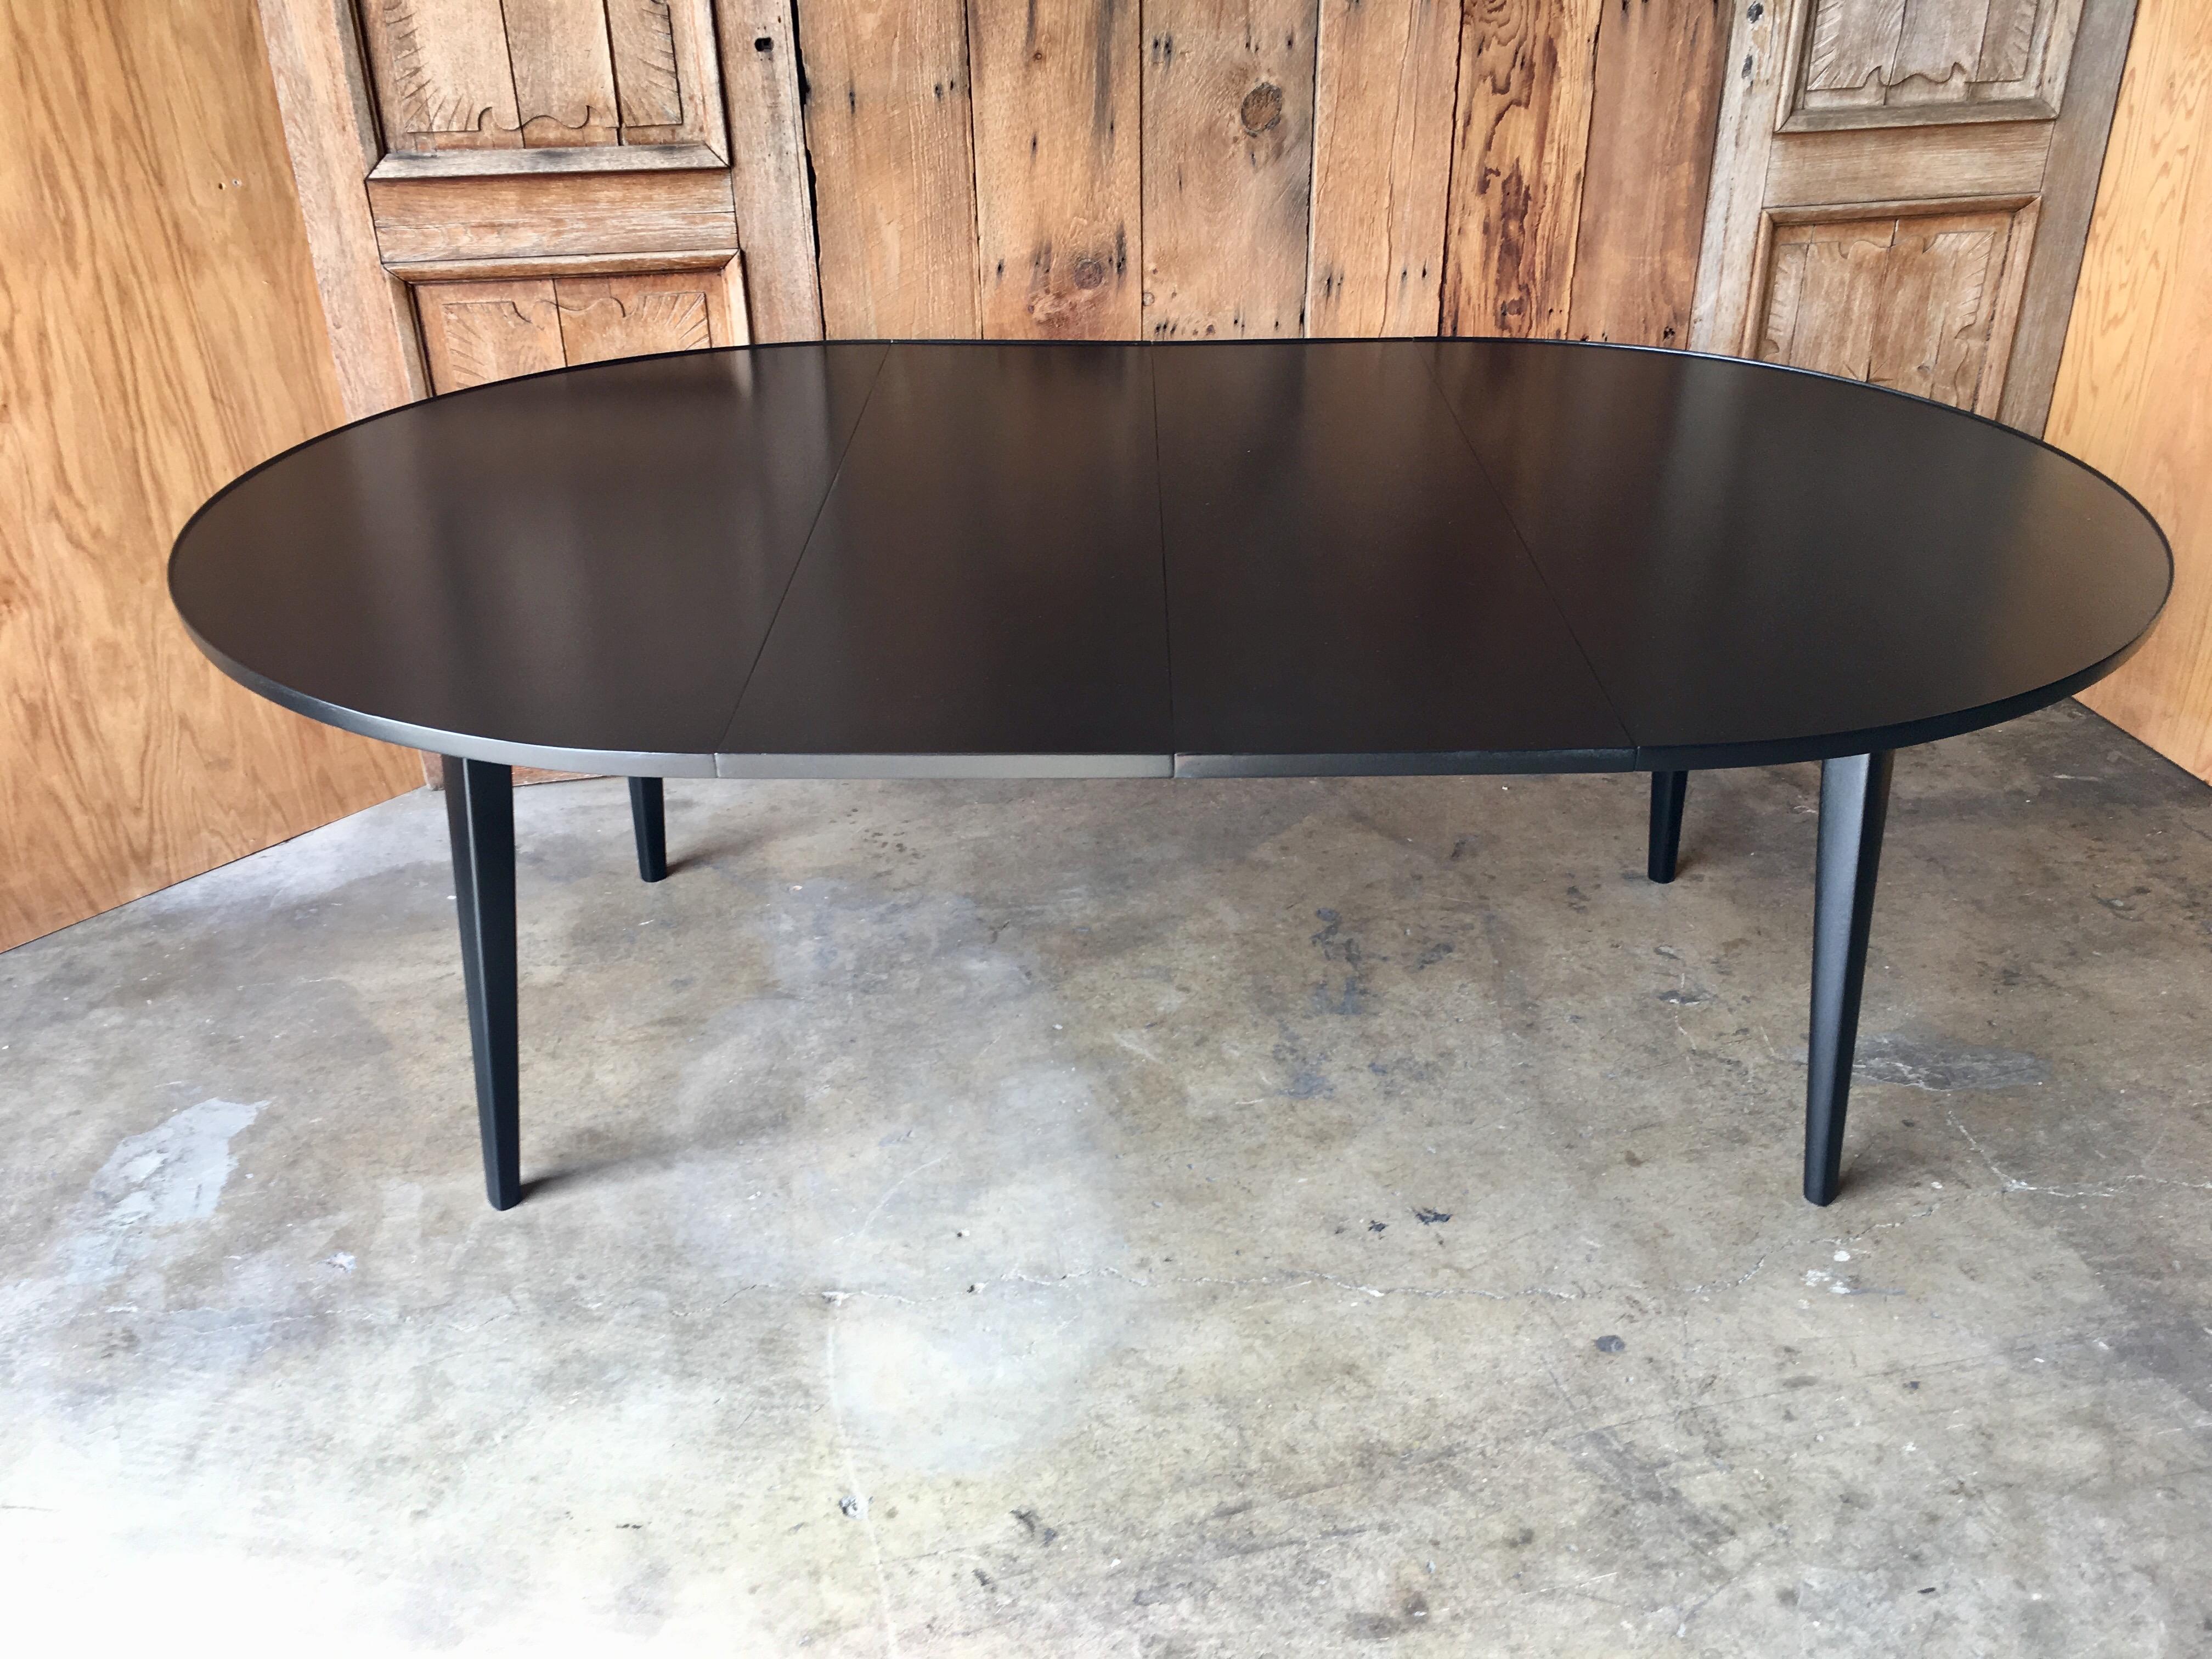 Round ebonized dining table made by Dunbar Furniture Company Designed by Edward Wormley
In it's smallest form the table is 54